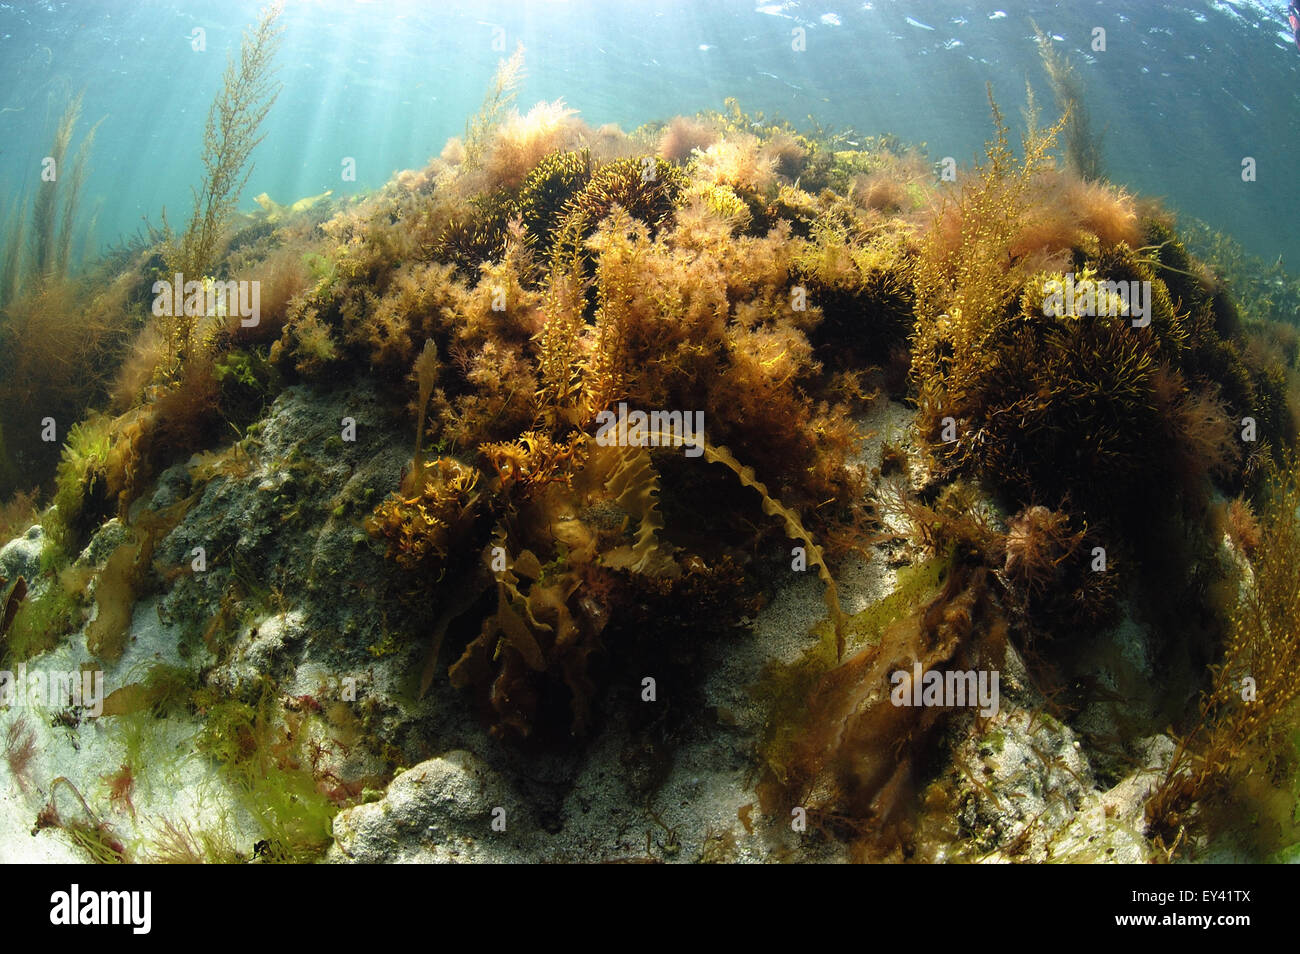 Underwater reef in shallow water Stock Photo